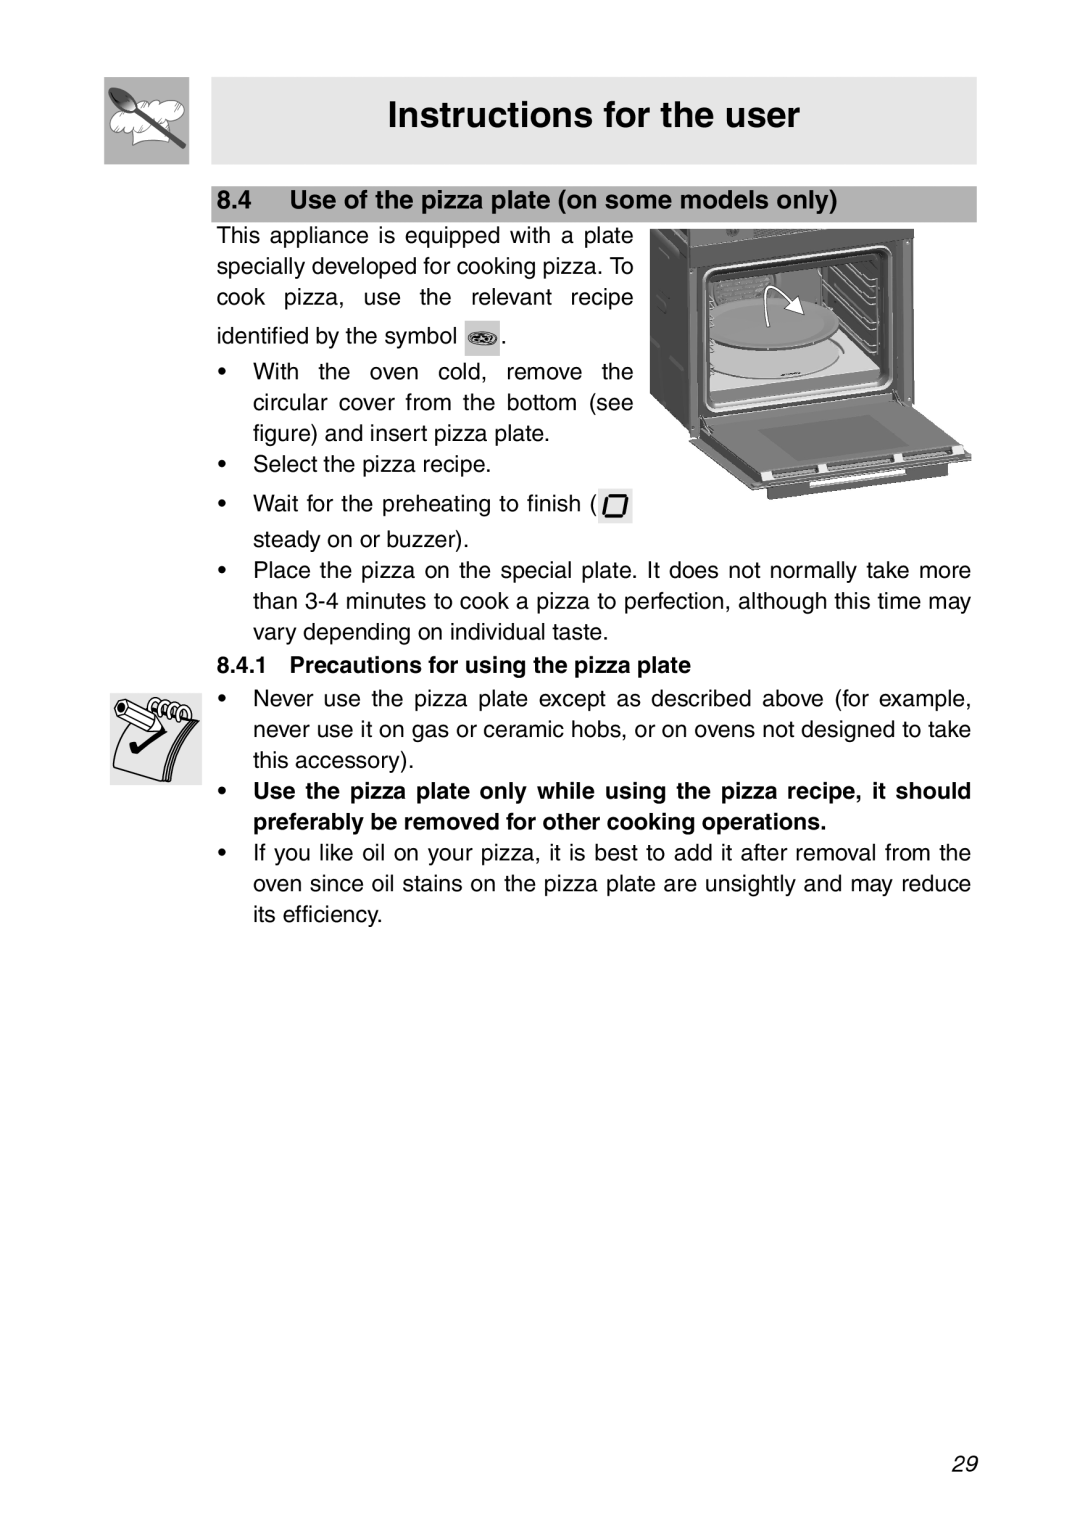 Smeg SC112 Use of the pizza plate on some models only, Precautions for using the pizza plate, Instructions for the user 